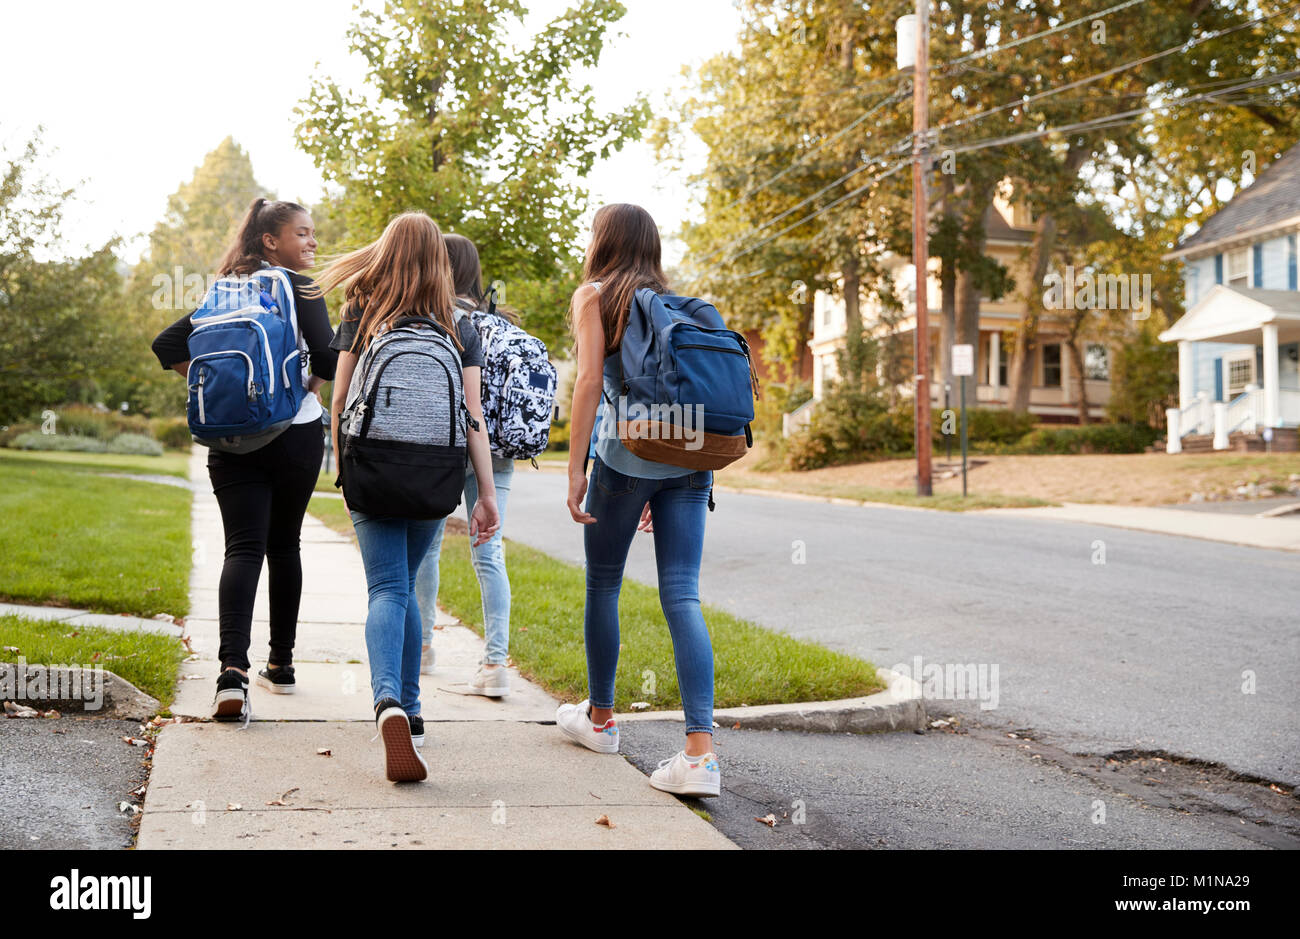 Four young teen girls walking to school together, back view Stock Photo